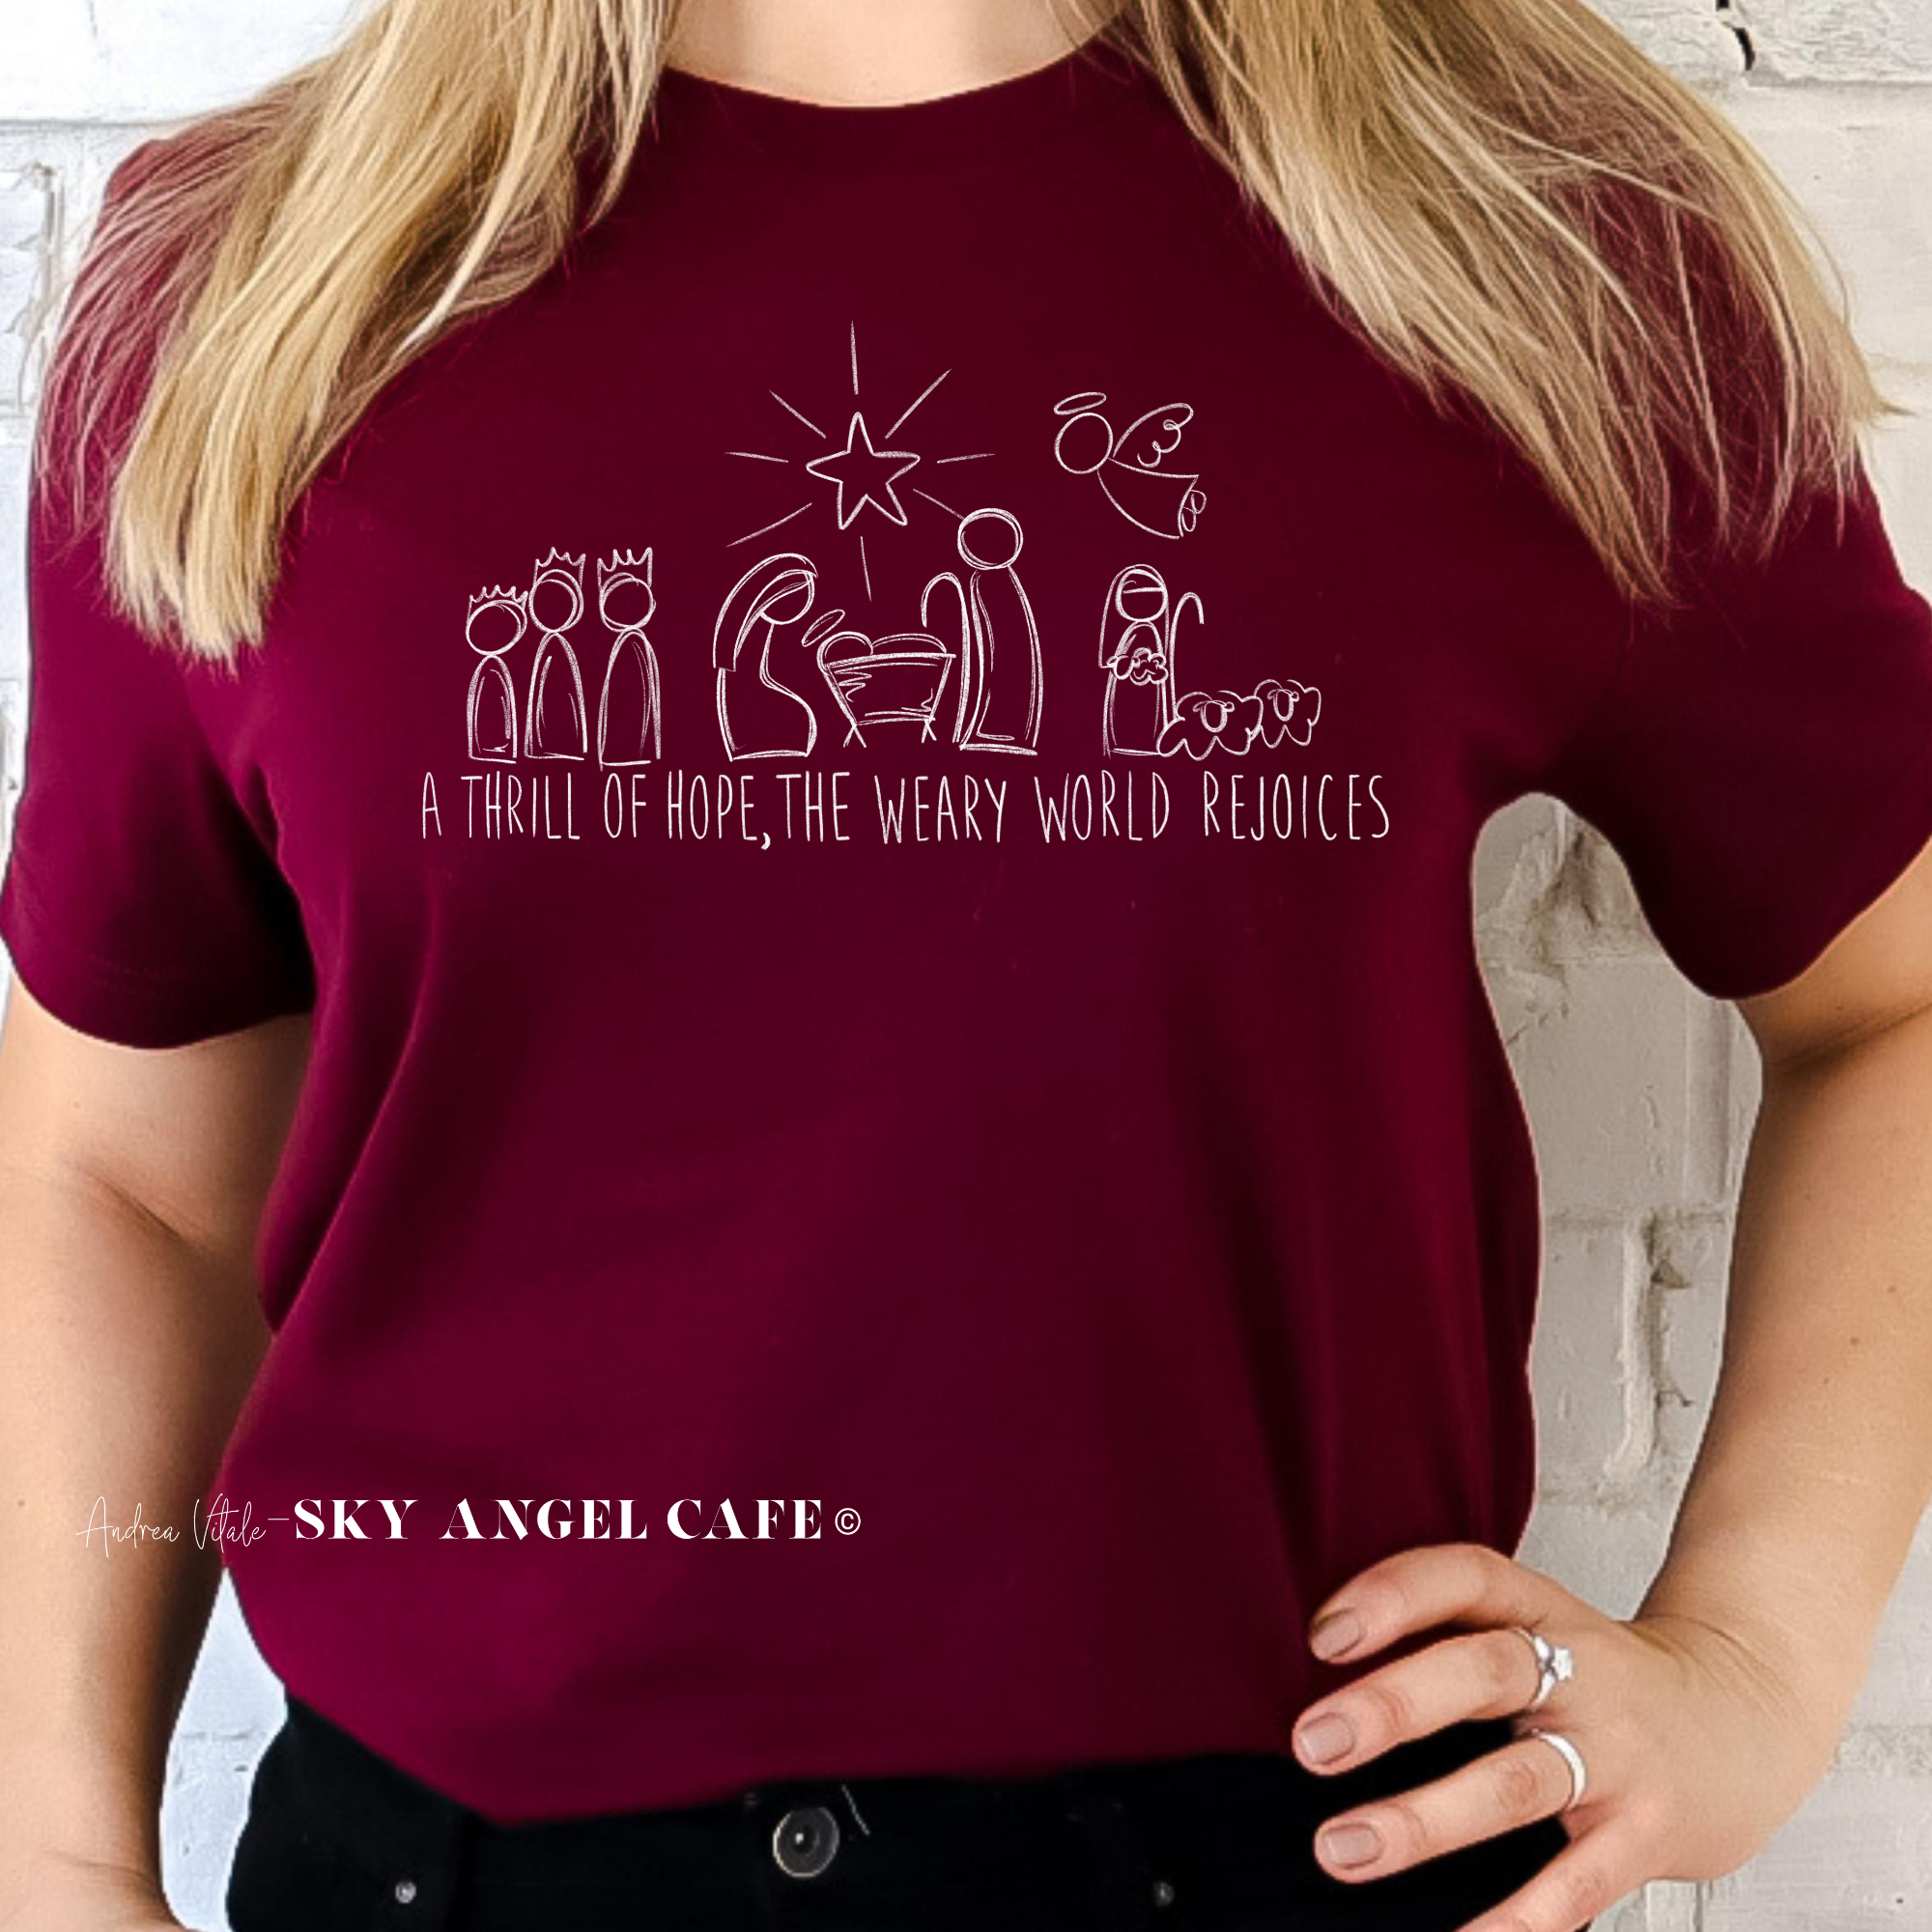 A Thrill of Hope, A Weary World Rejoices with White Text - BC 3001 Dark Maroon - Andrea Vitale - Sky Angel Cafe